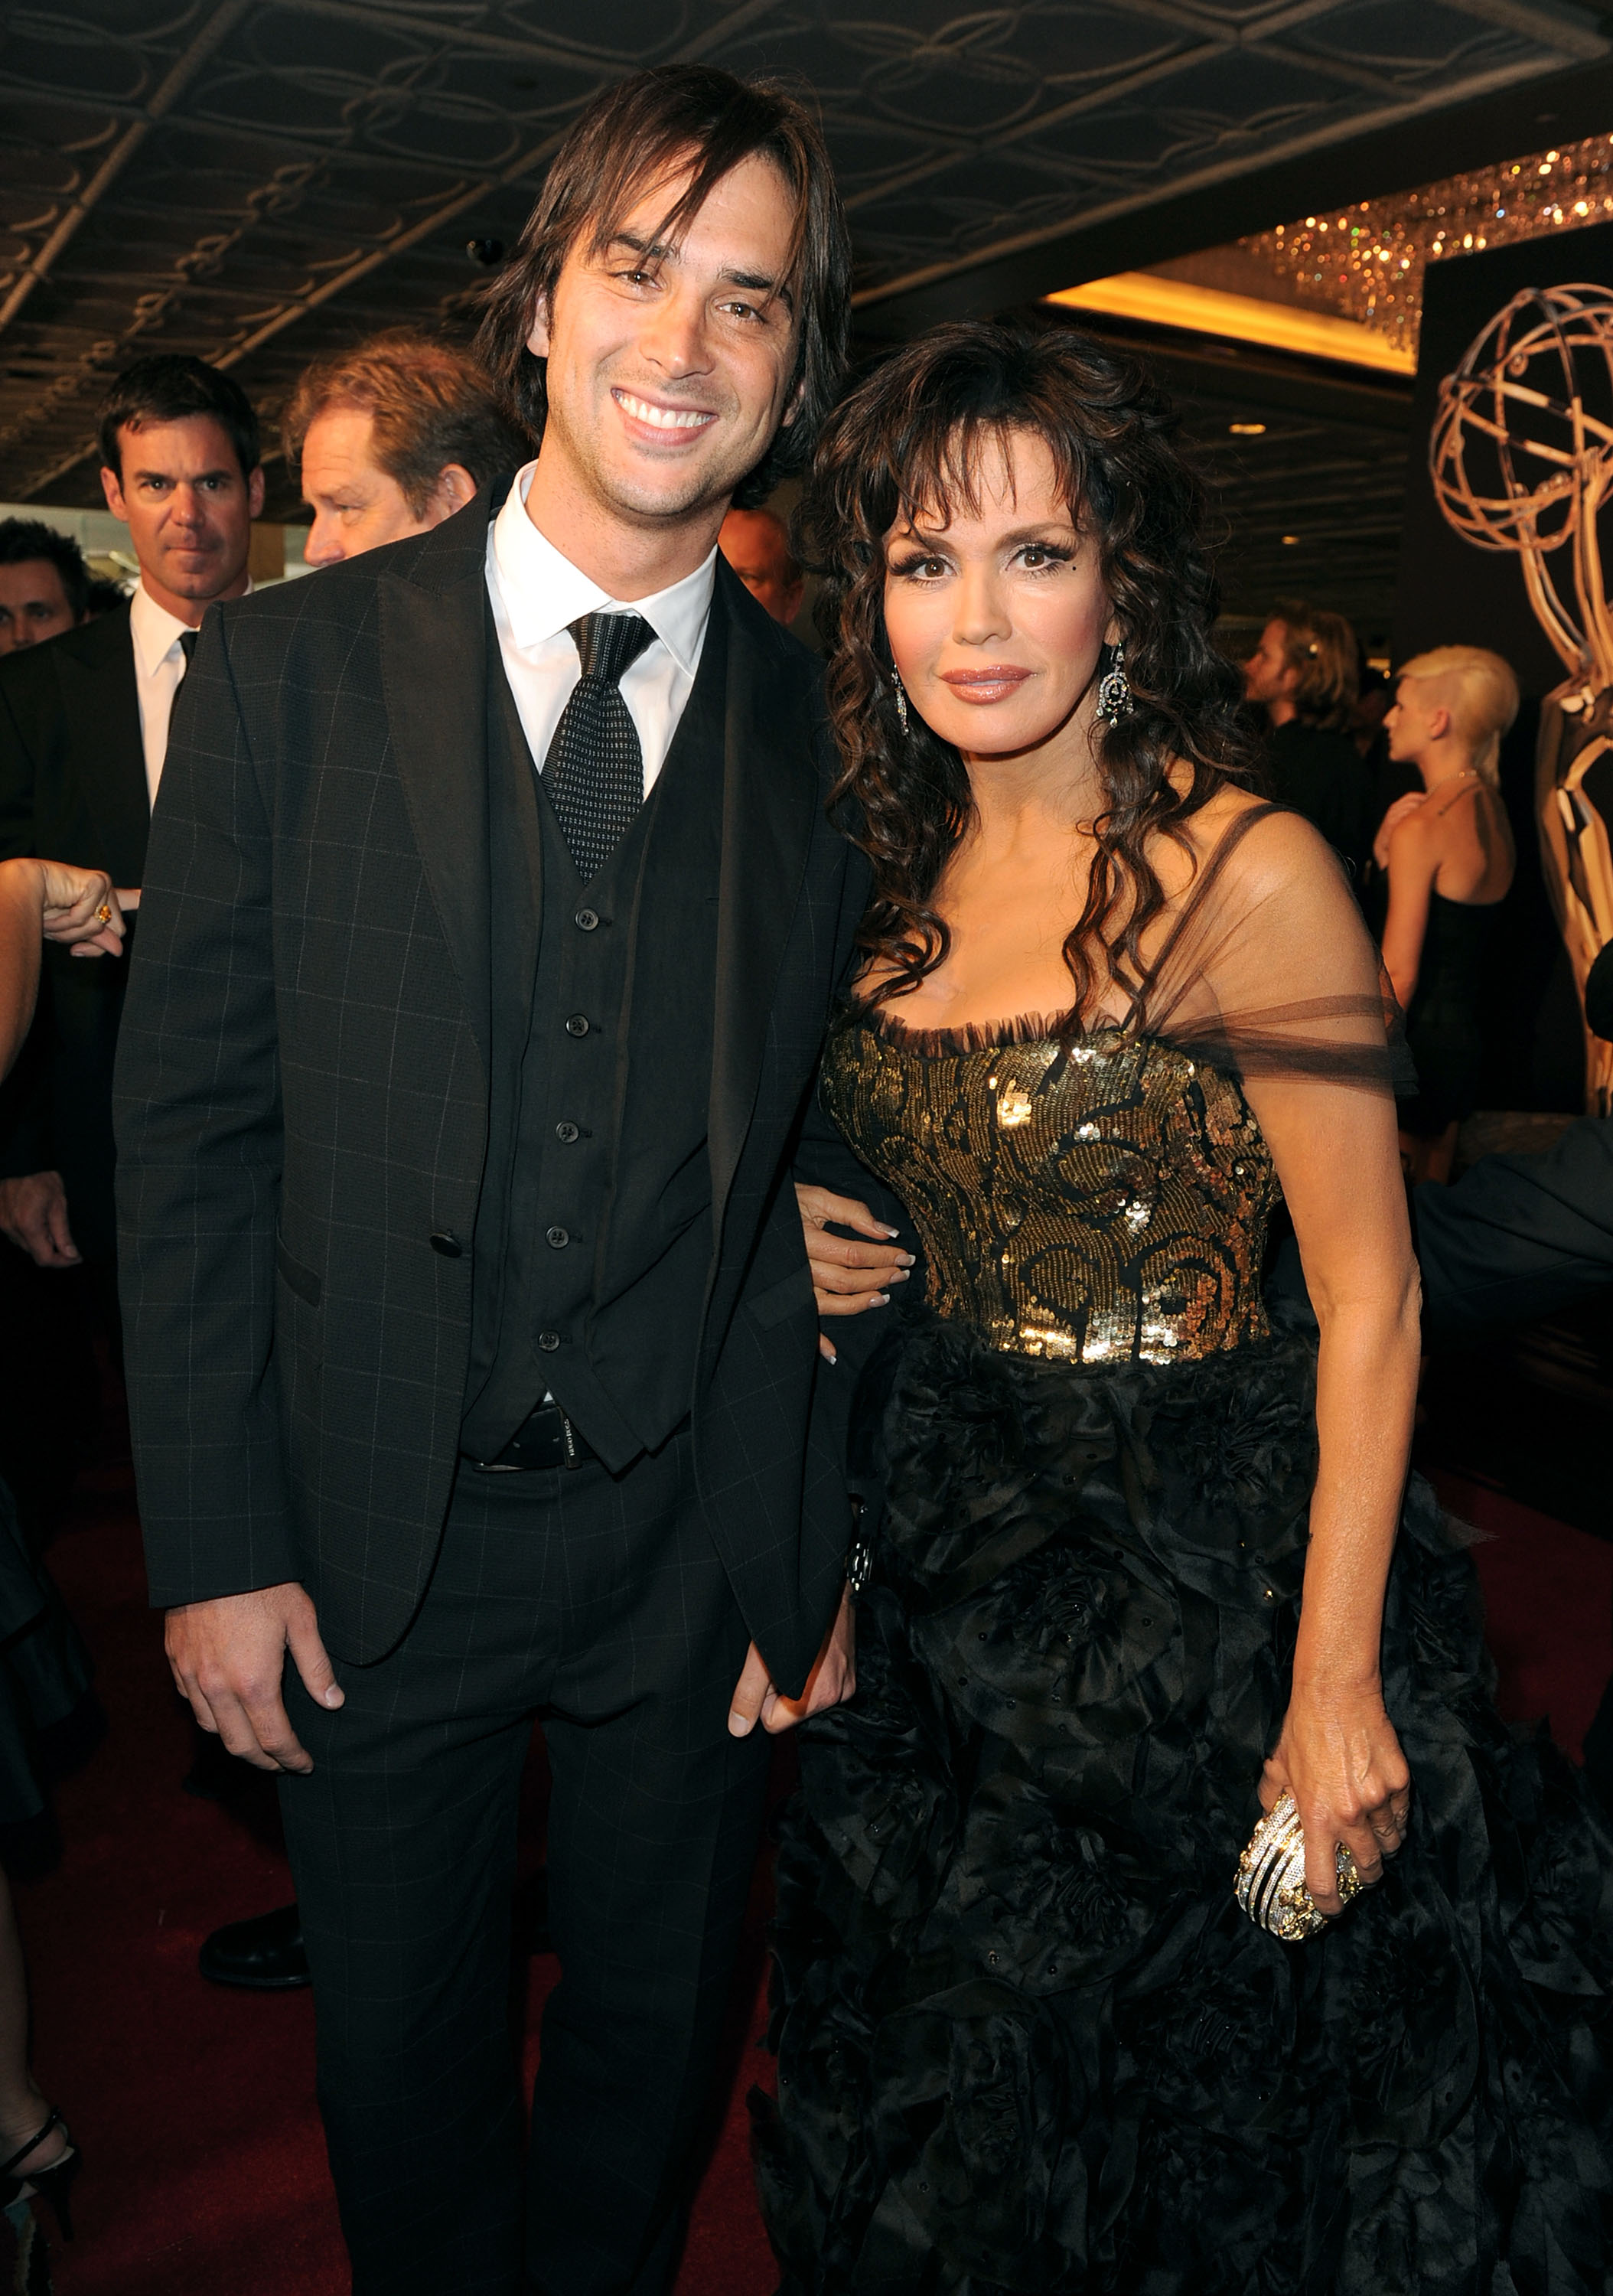 Marie Osmond and Stephen Osmond at the 37th Annual Daytime Entertainment Emmy Awards in Las Vegas, Nevada, on June 27, 2010 | Source: Getty Images